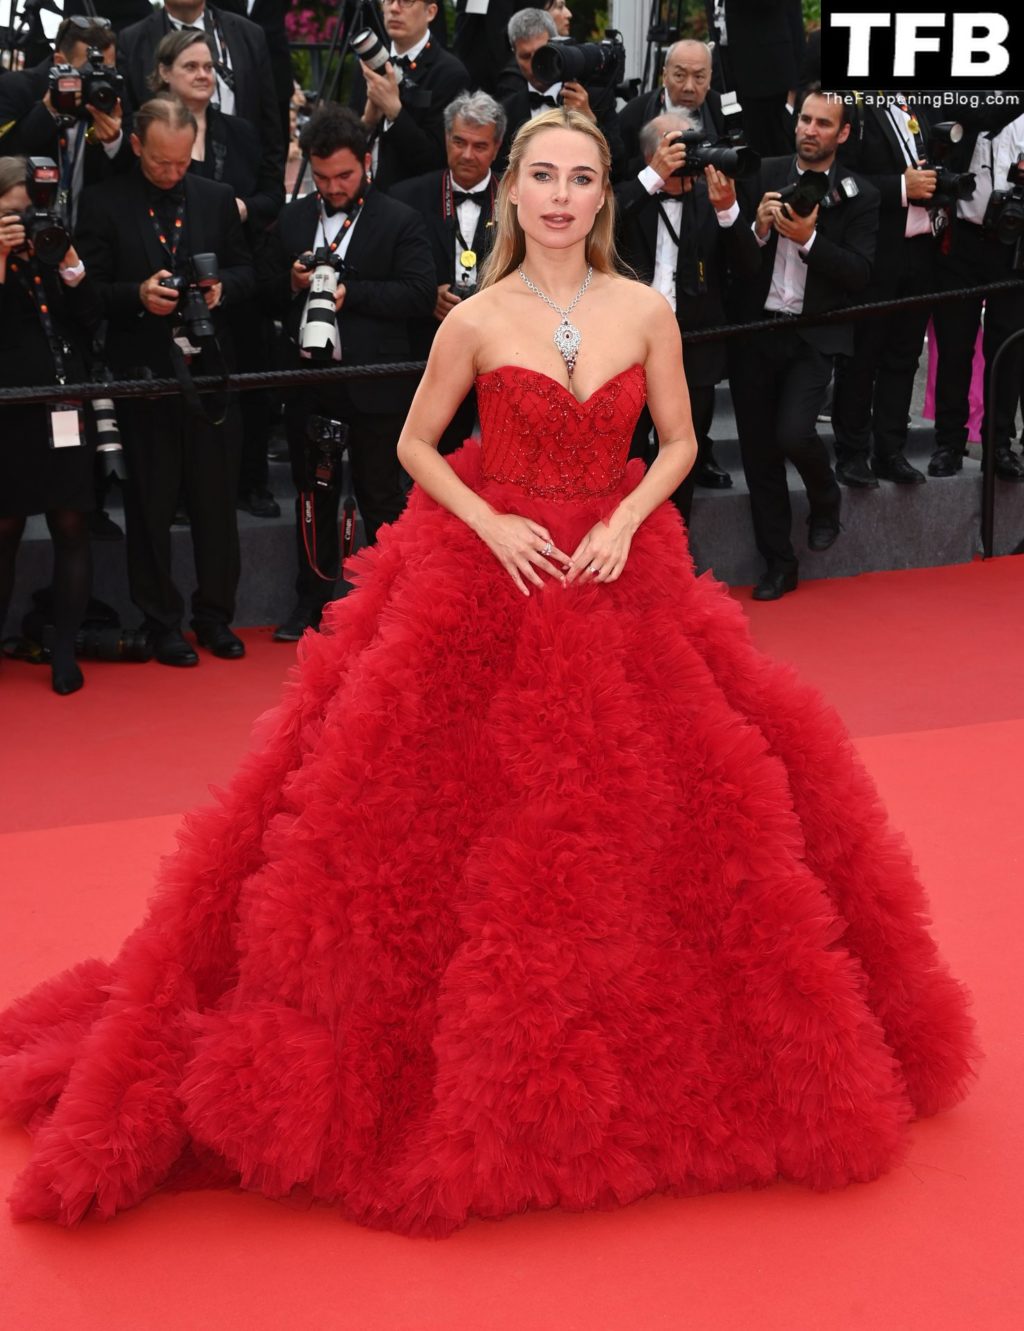 Kimberley Garner Sexy The Fappening Blog 92 1024x1331 - Kimberley Garner Looks Hot in a Red Dress at the 75th Annual Cannes Film Festival (134 Photos)